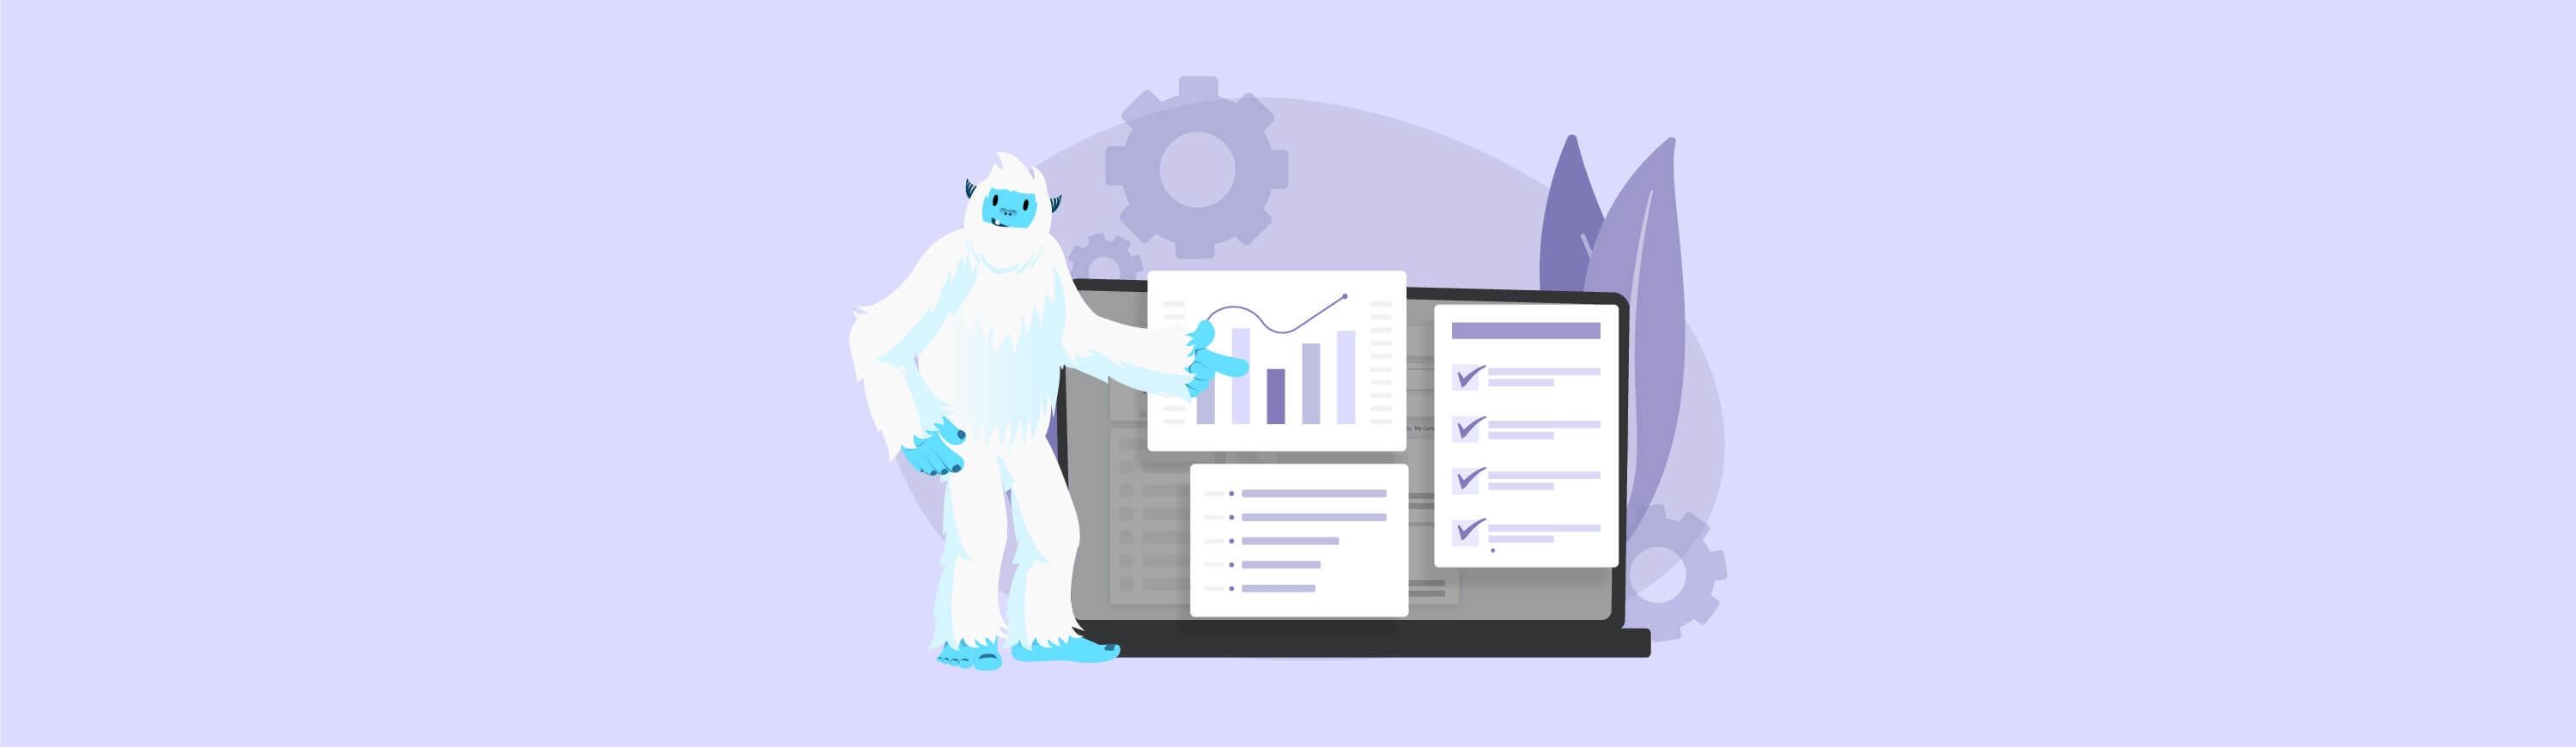 Illustration of Carl the yeti pointing to a laptop with several different graphs.